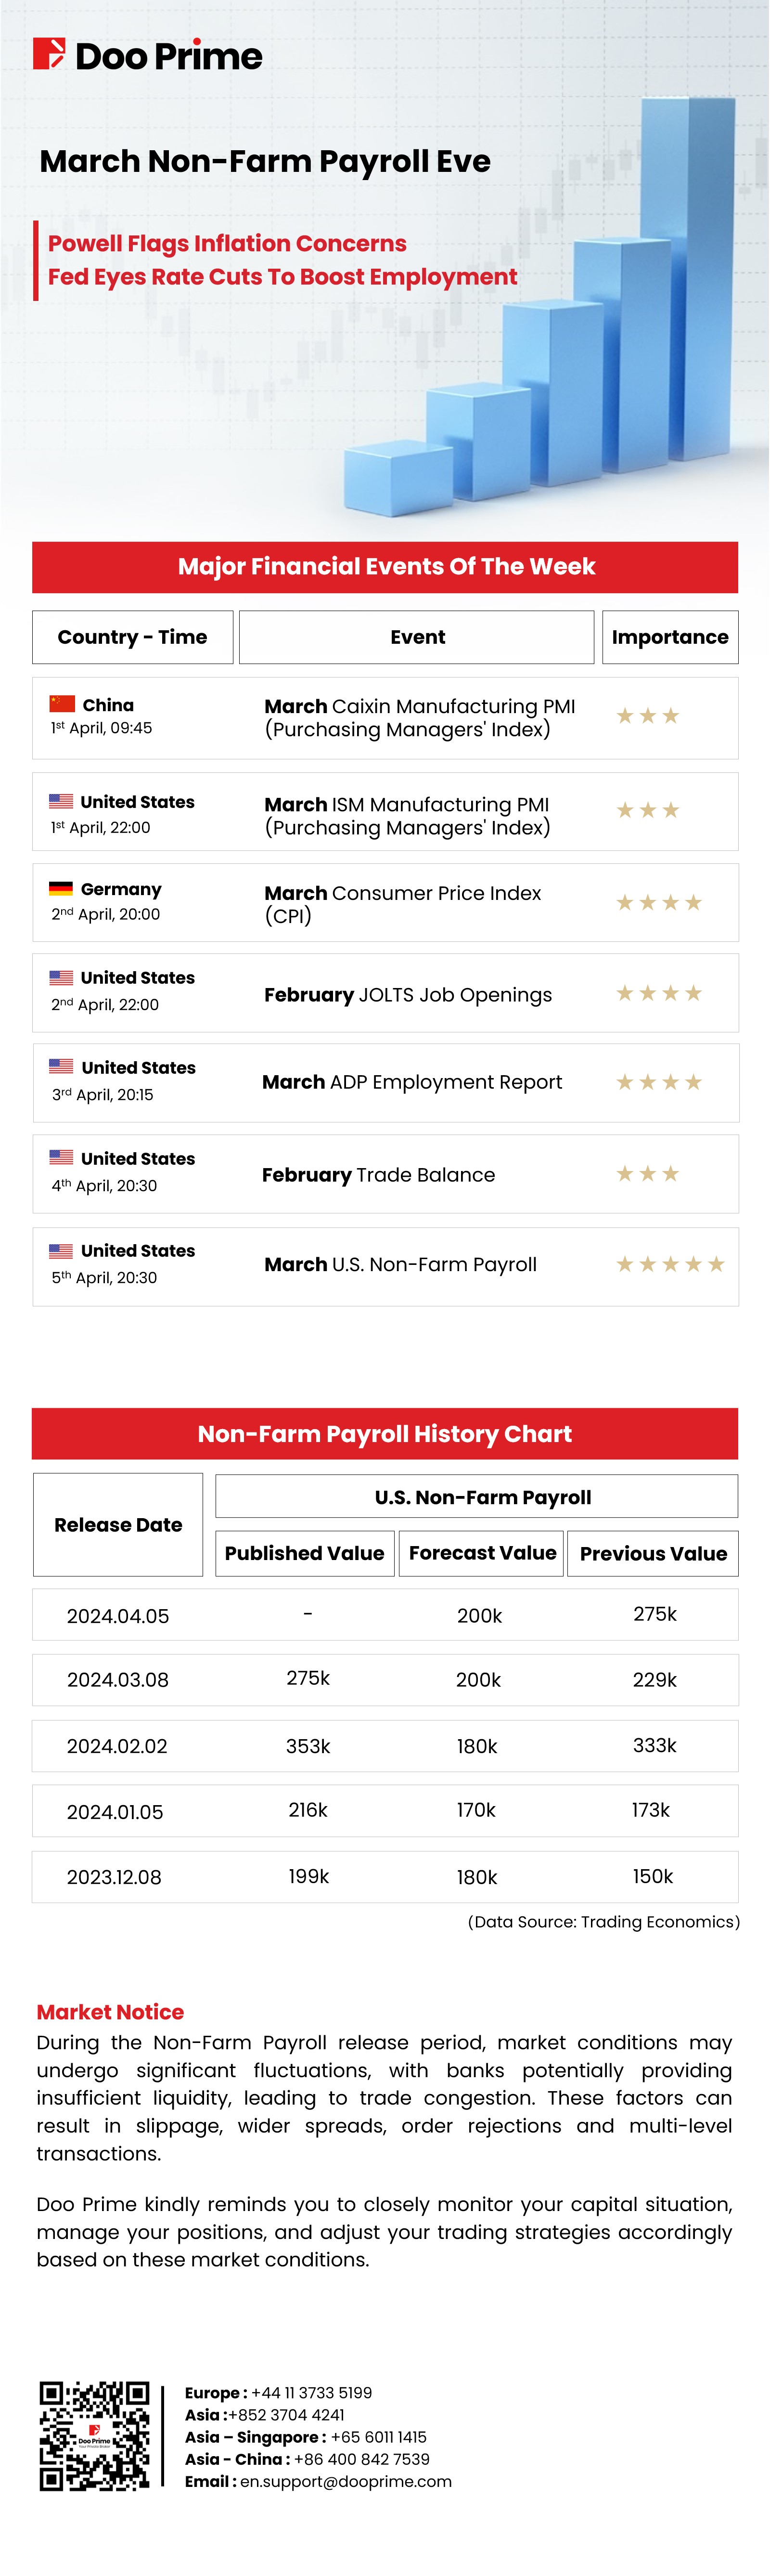 March Non-Farm Payroll Eve​: Fed Eyes Rate Cuts To Boost Employment​